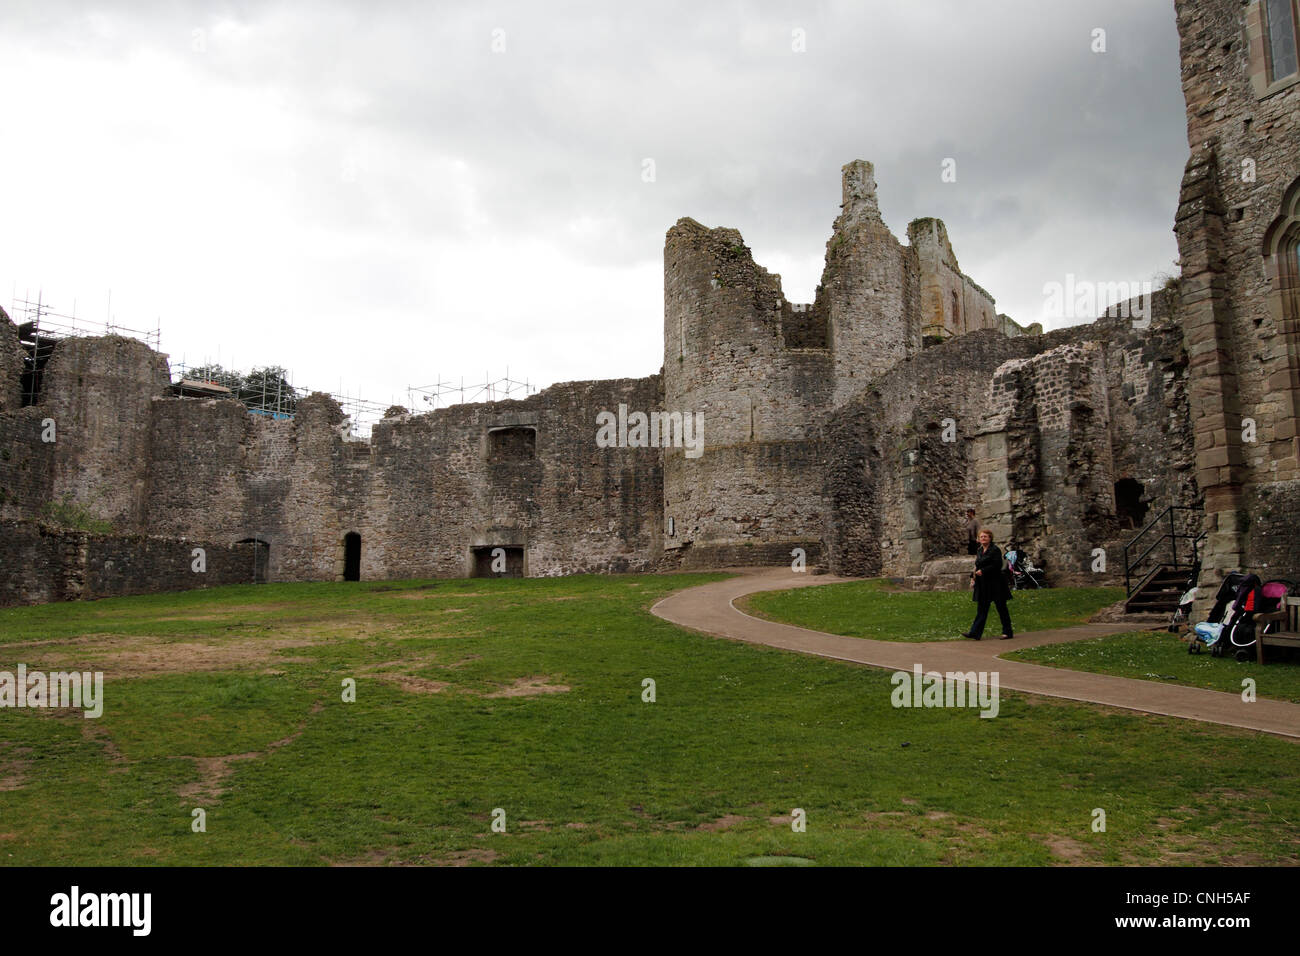 Chepstow Castle - Inner Bailey Chepstow is a Norman castle situated high above the banks of the river Wye in southeast Wales. Construction began in 1067, less than a year after William the Conqueror was crowned King of England. Built by Norman lord William FitzOsbern. Stock Photo